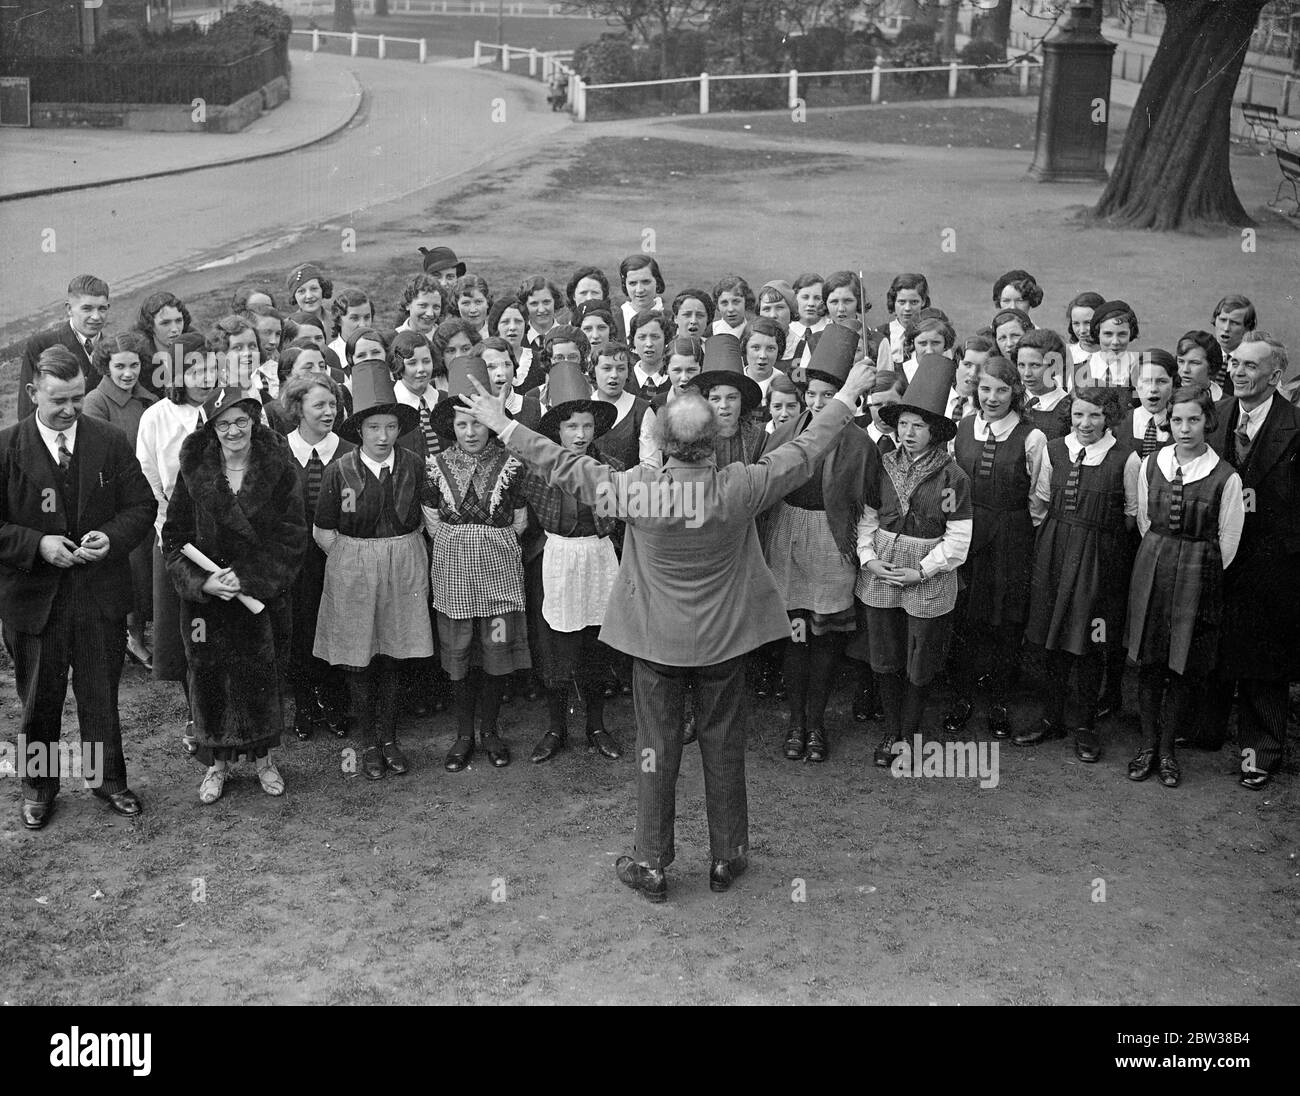 Welsh children ' s choir at Ealing in National Costume . Child members of the Aberaman juvenile choir of Wales practiced on Ealing Green before giving a concert at Ealing Town Hall . The choir has won over 300 prizes , including 11 national awards . Photo shows , the choir rehearsing on Ealing Green under the direction of their conductor , Mr Mitchelmore . 11 April 1934 Stock Photo